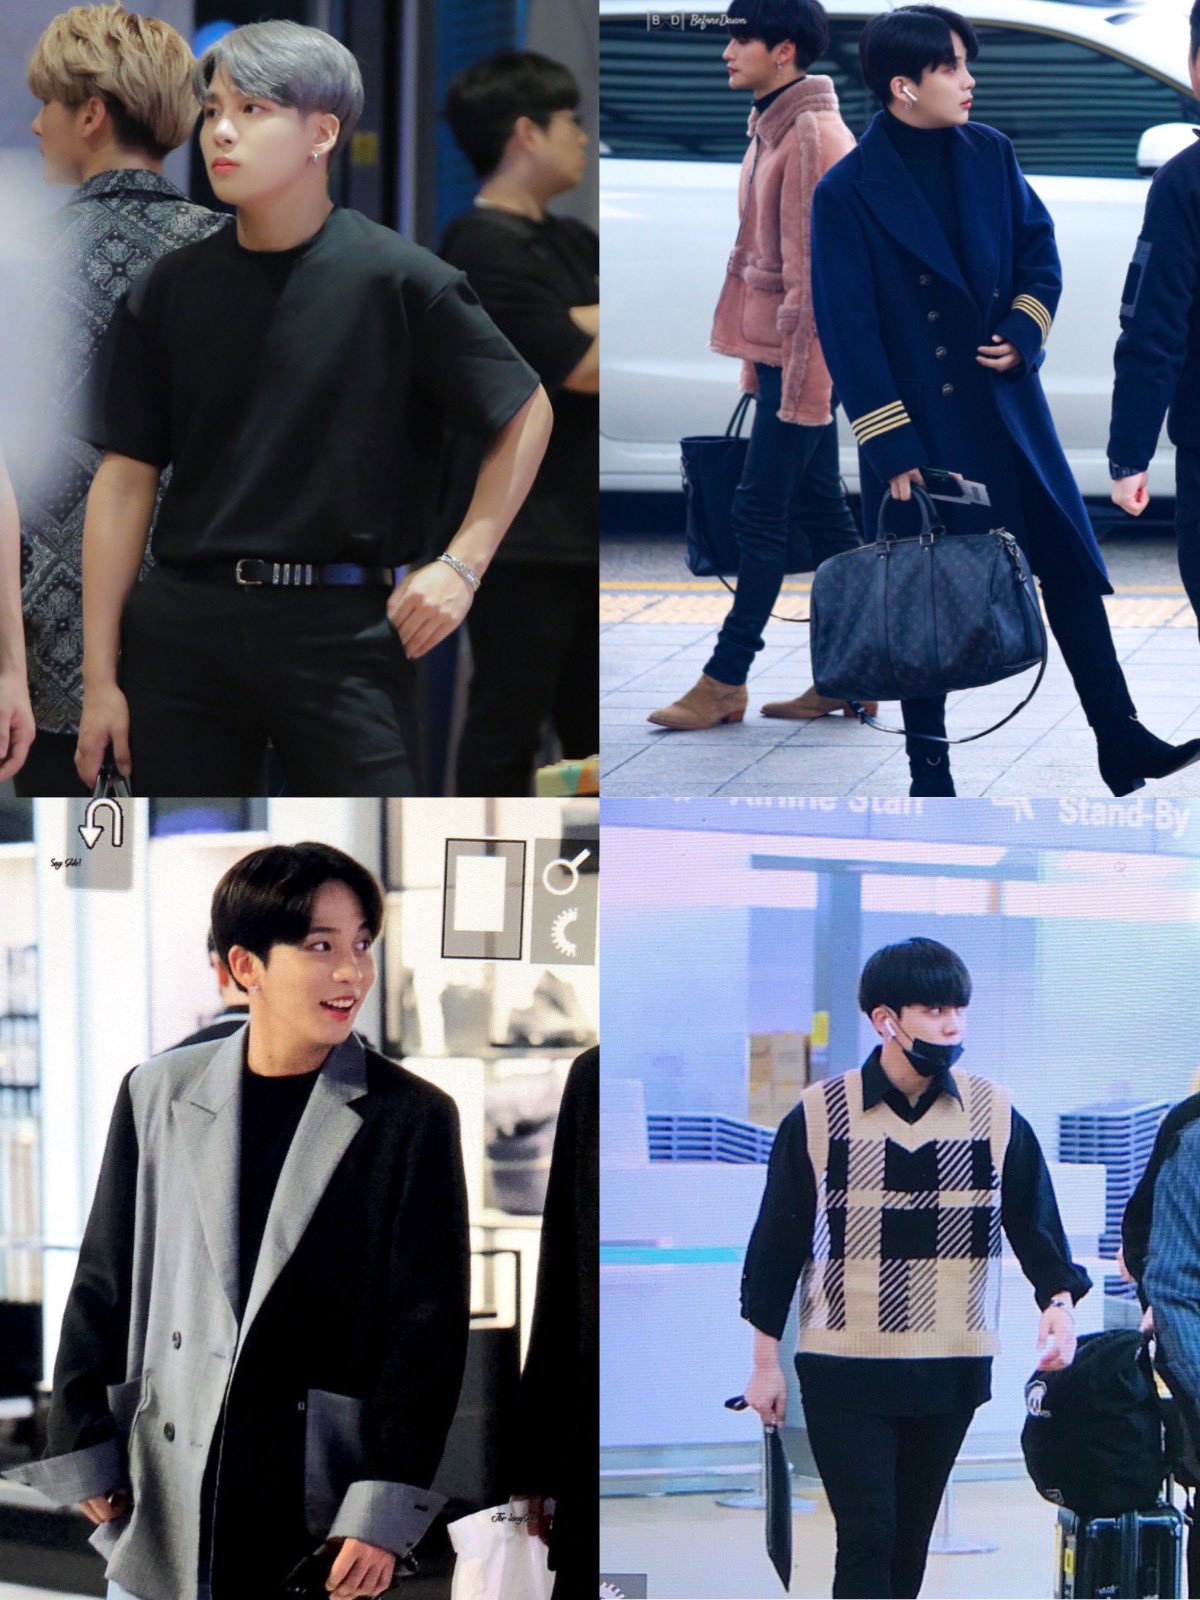 ً on X: Can't wait to see Jongho turn every airport into a fashion show   / X